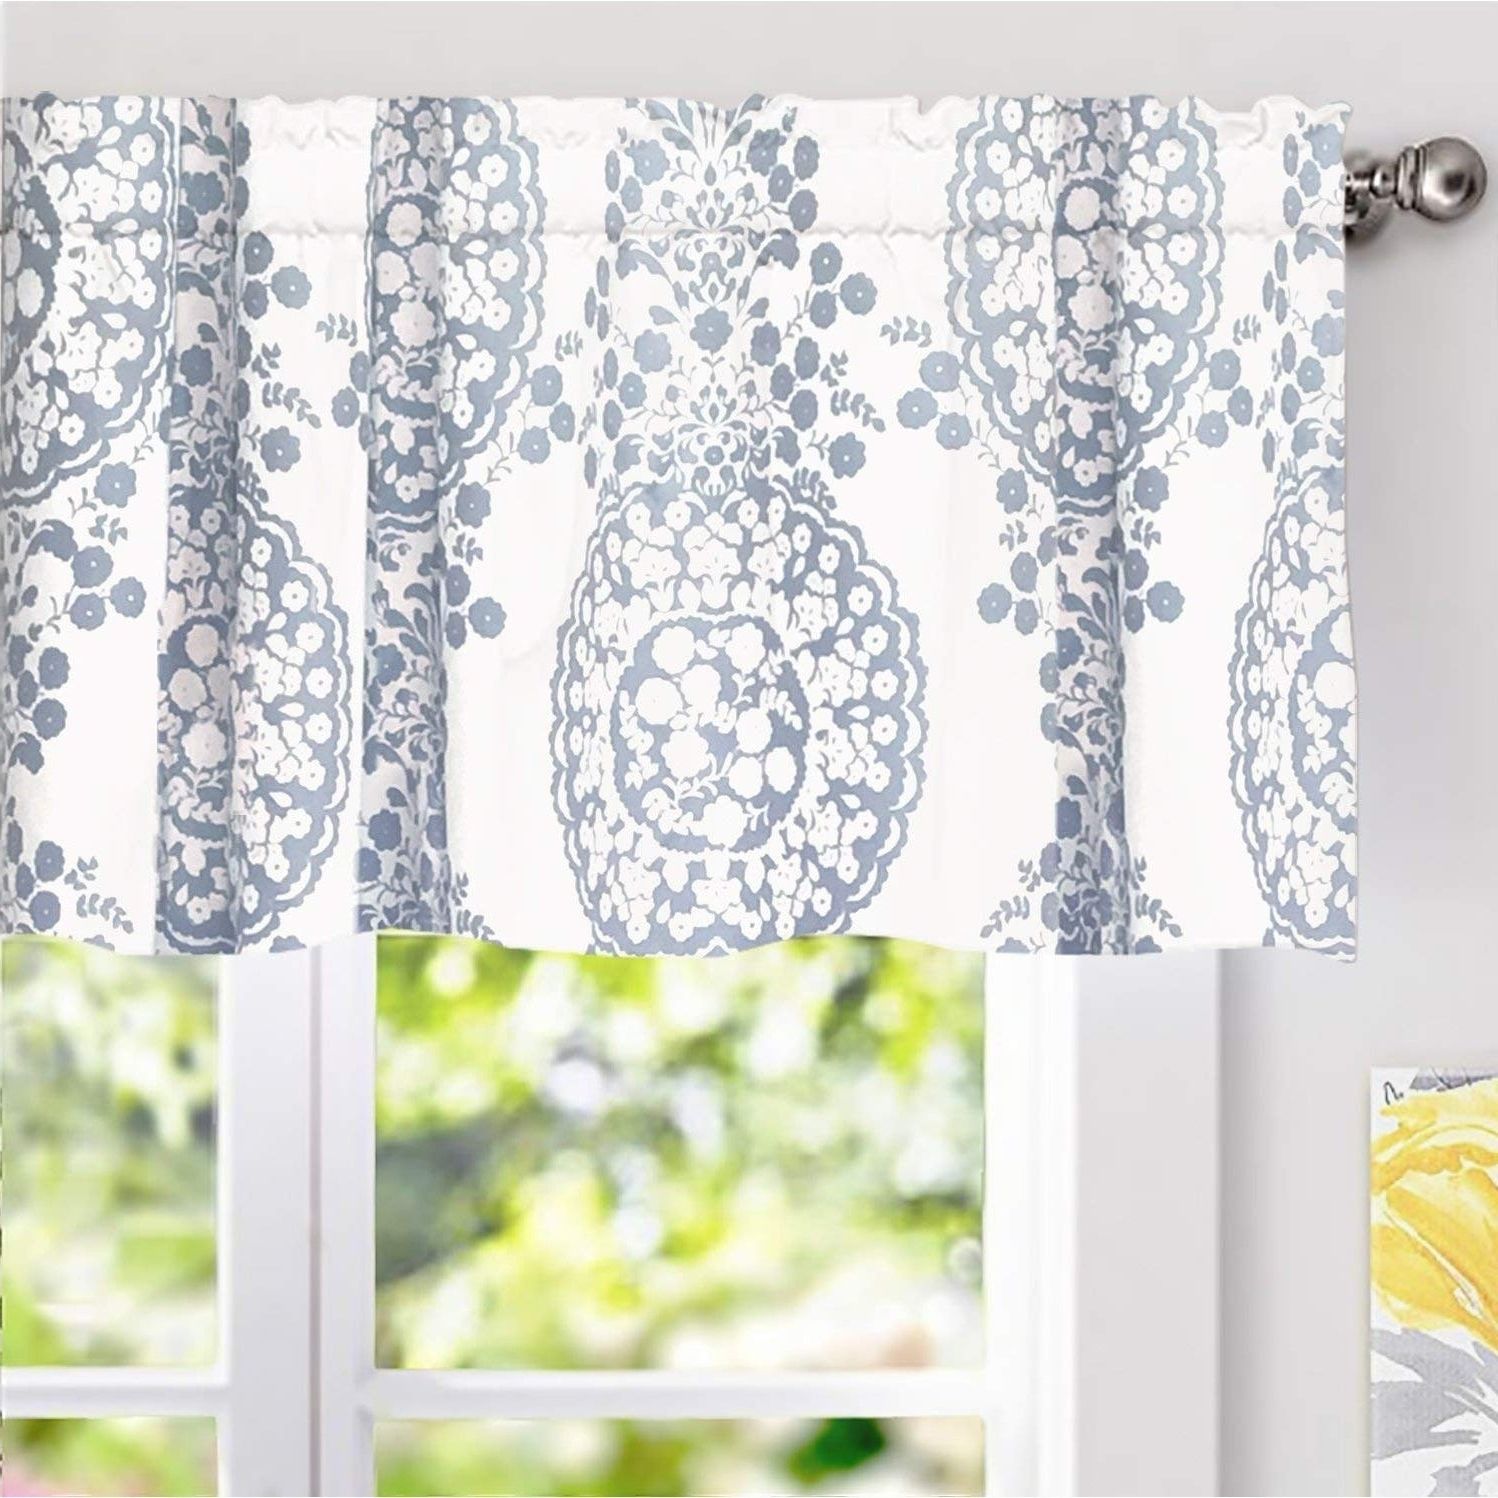 Well Known Driftaway Samantha Pastel Damask Printed Classic Window Valance In Pastel Damask Printed Room Darkening Kitchen Tiers (View 9 of 20)